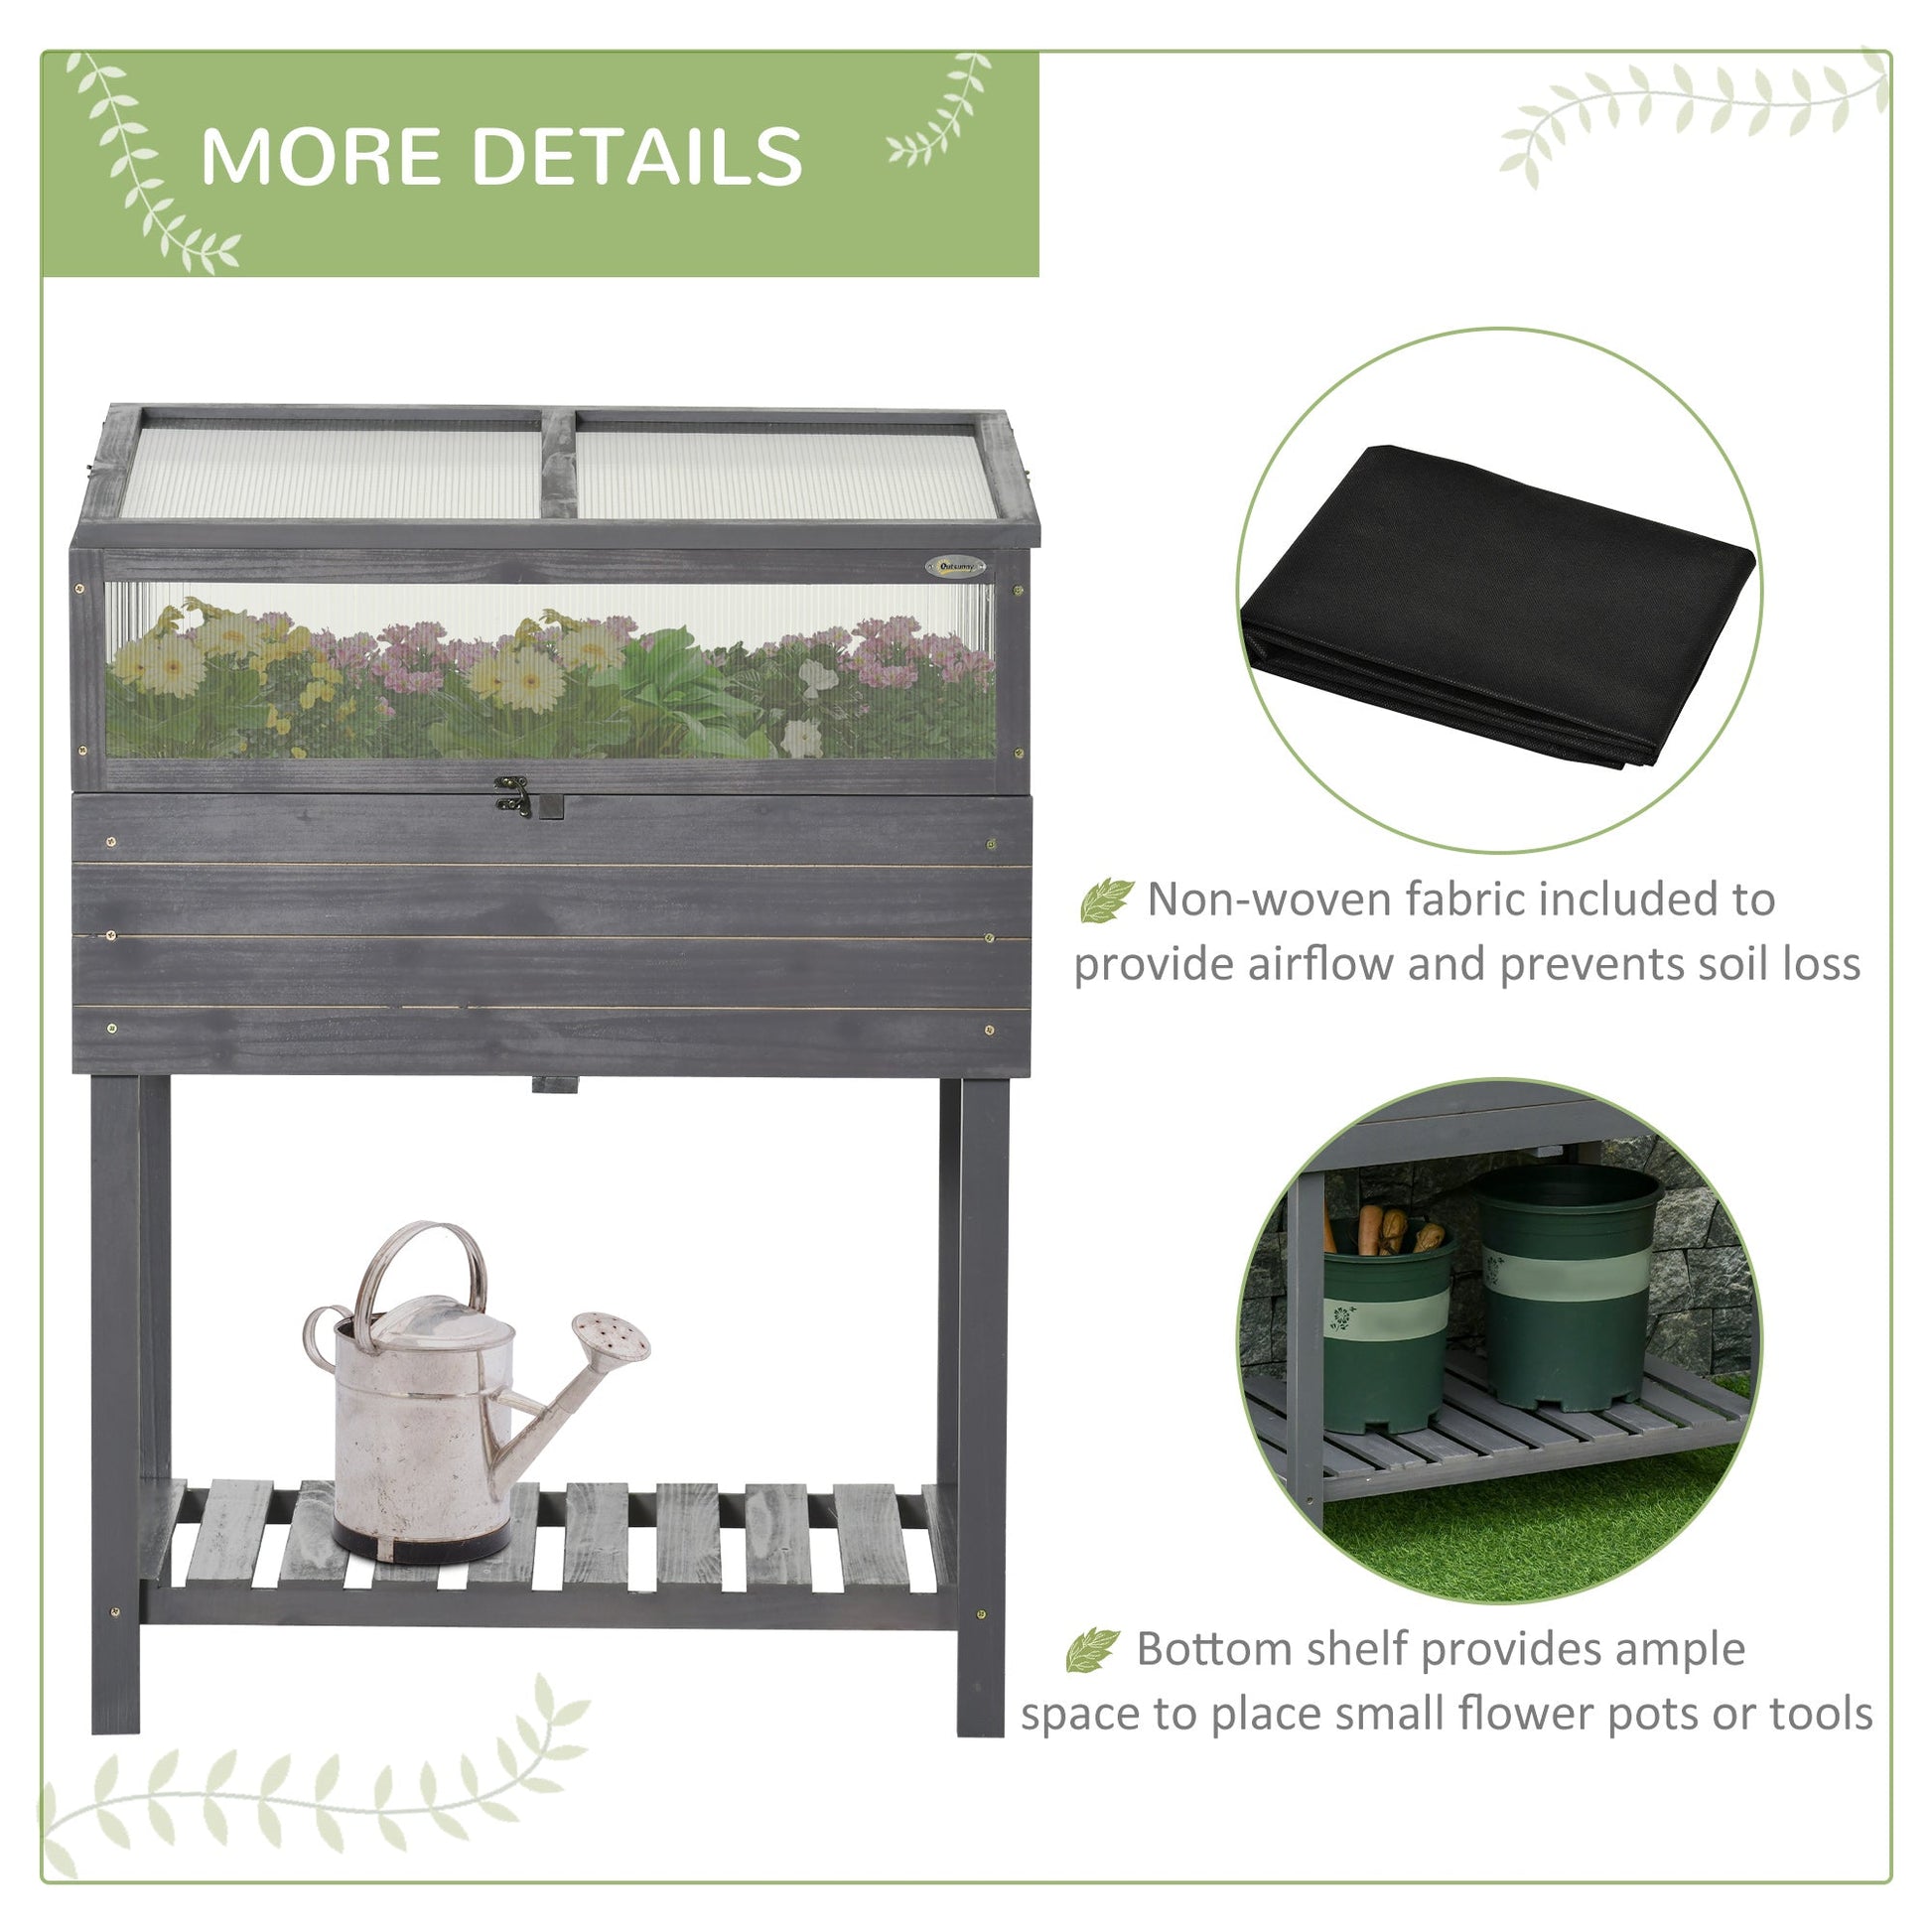 Raised Garden Bed with Cold Frame Greenhouse, Grow Grids and Storage Shelf, Outdoor 2 Tiers Elevated Wood Planter Box for Herbs and Vegetables, Use for Patio, Backyard, Balcony at Gallery Canada